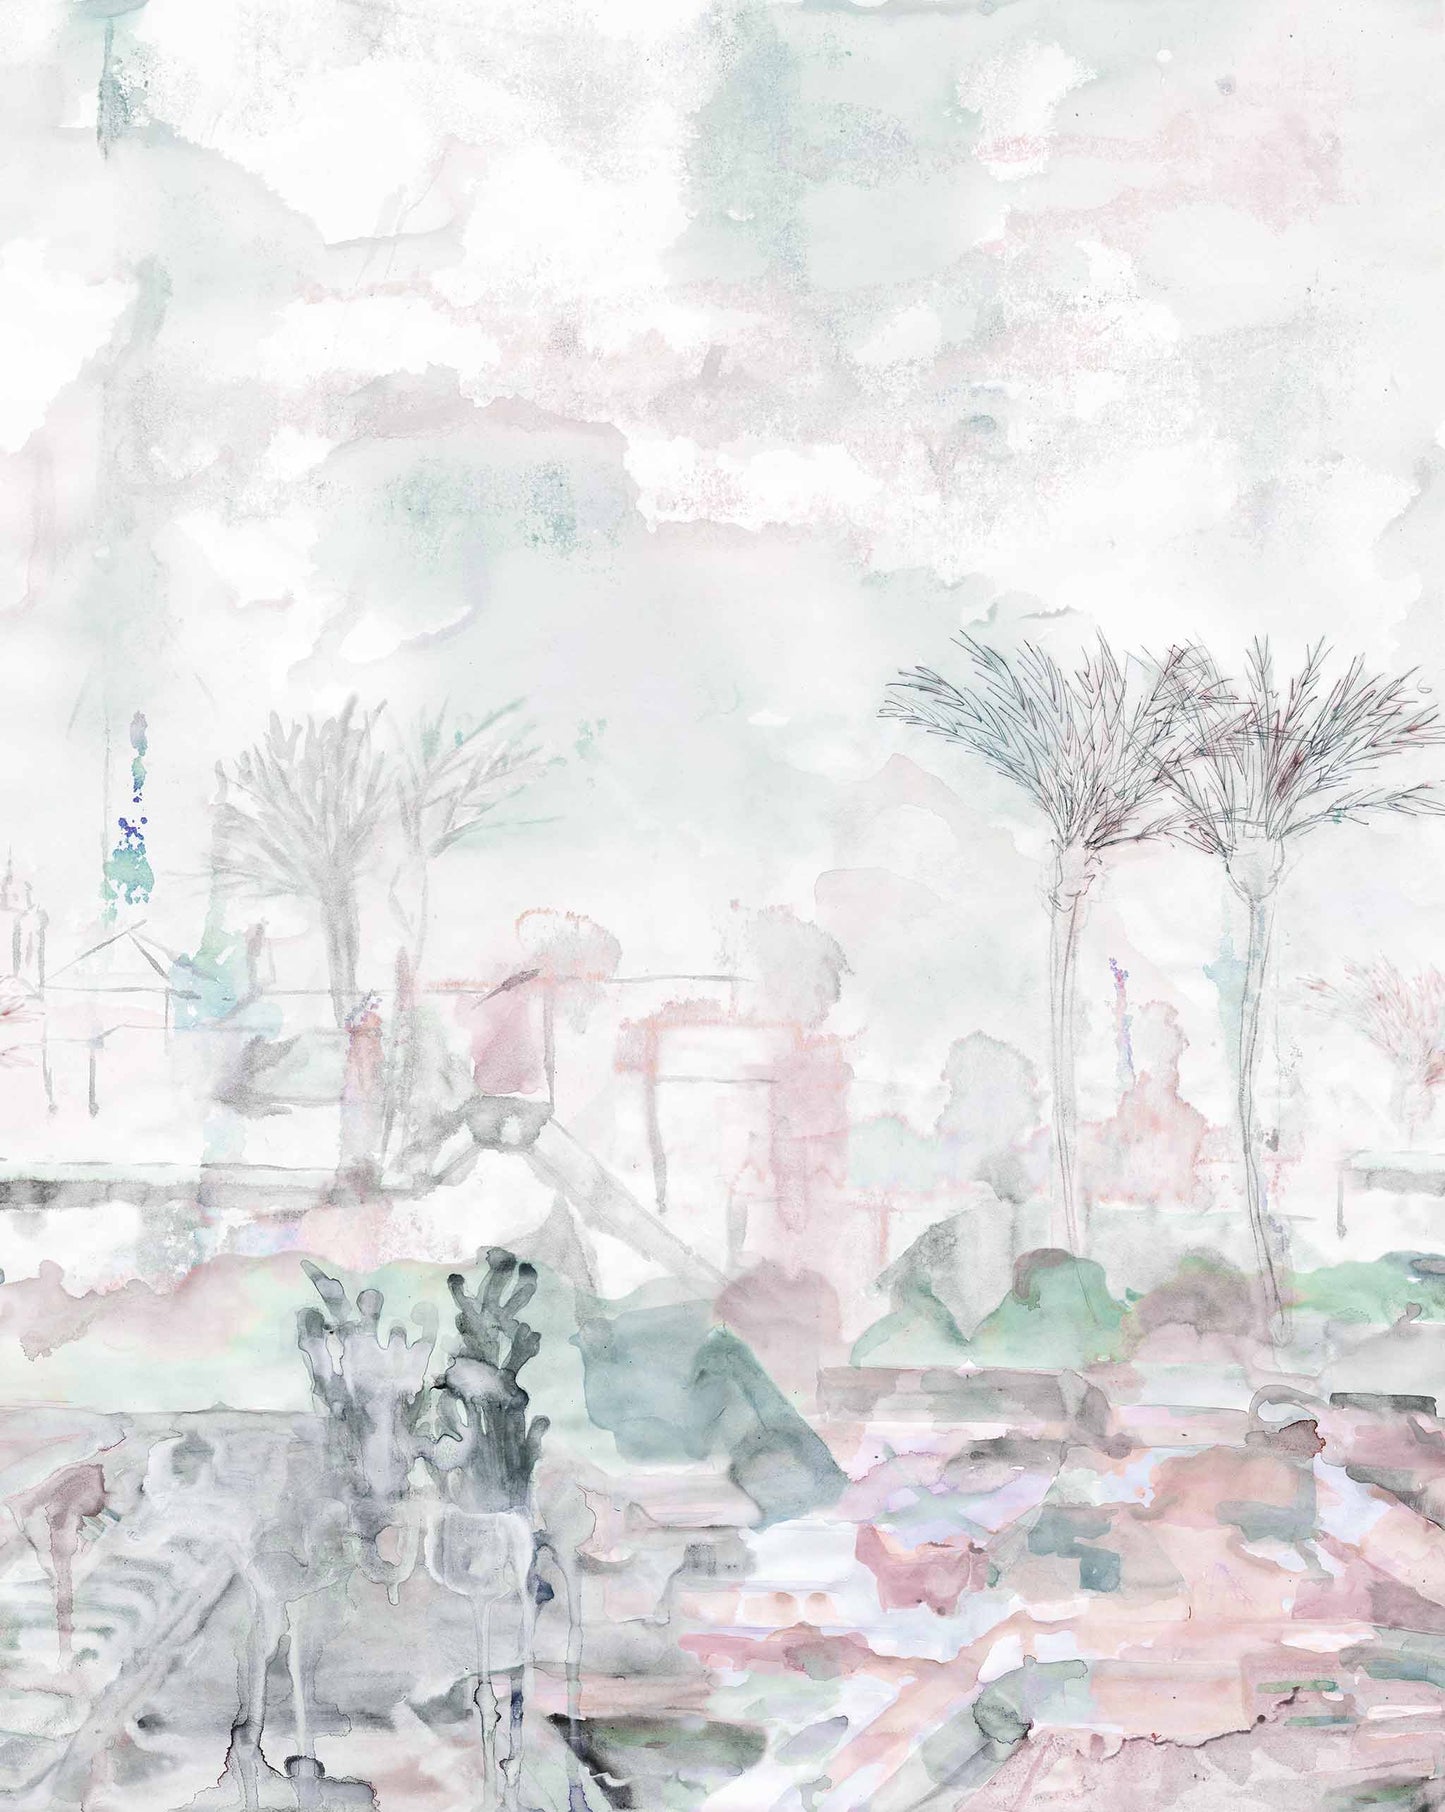 Palmeraie Wallpaper Mural depicting a serene, abstract landscape with soft, muted colors, showing trees and vague architectural forms reminiscent of a Marrakech cityscape.